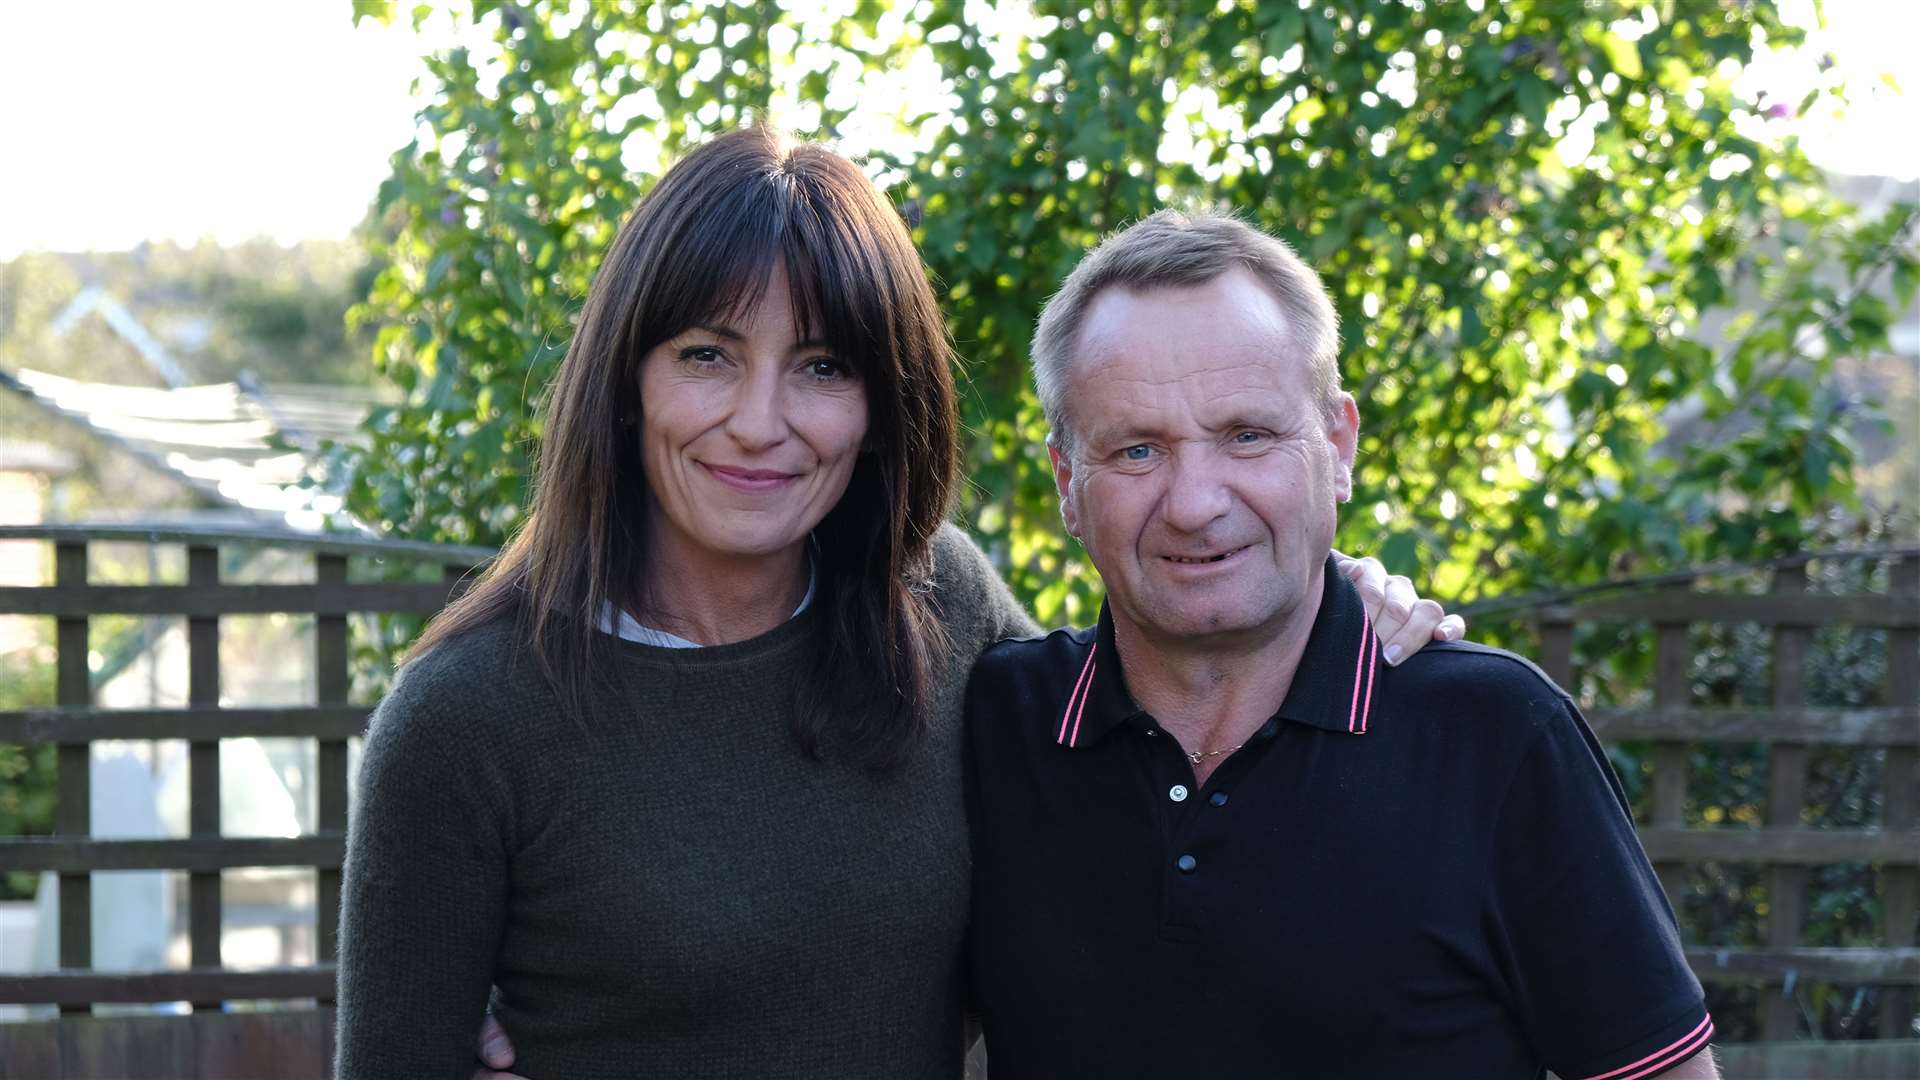 Simon is told he has four birth siblings by presenter Davina McCall on last night's show Photo: ITV